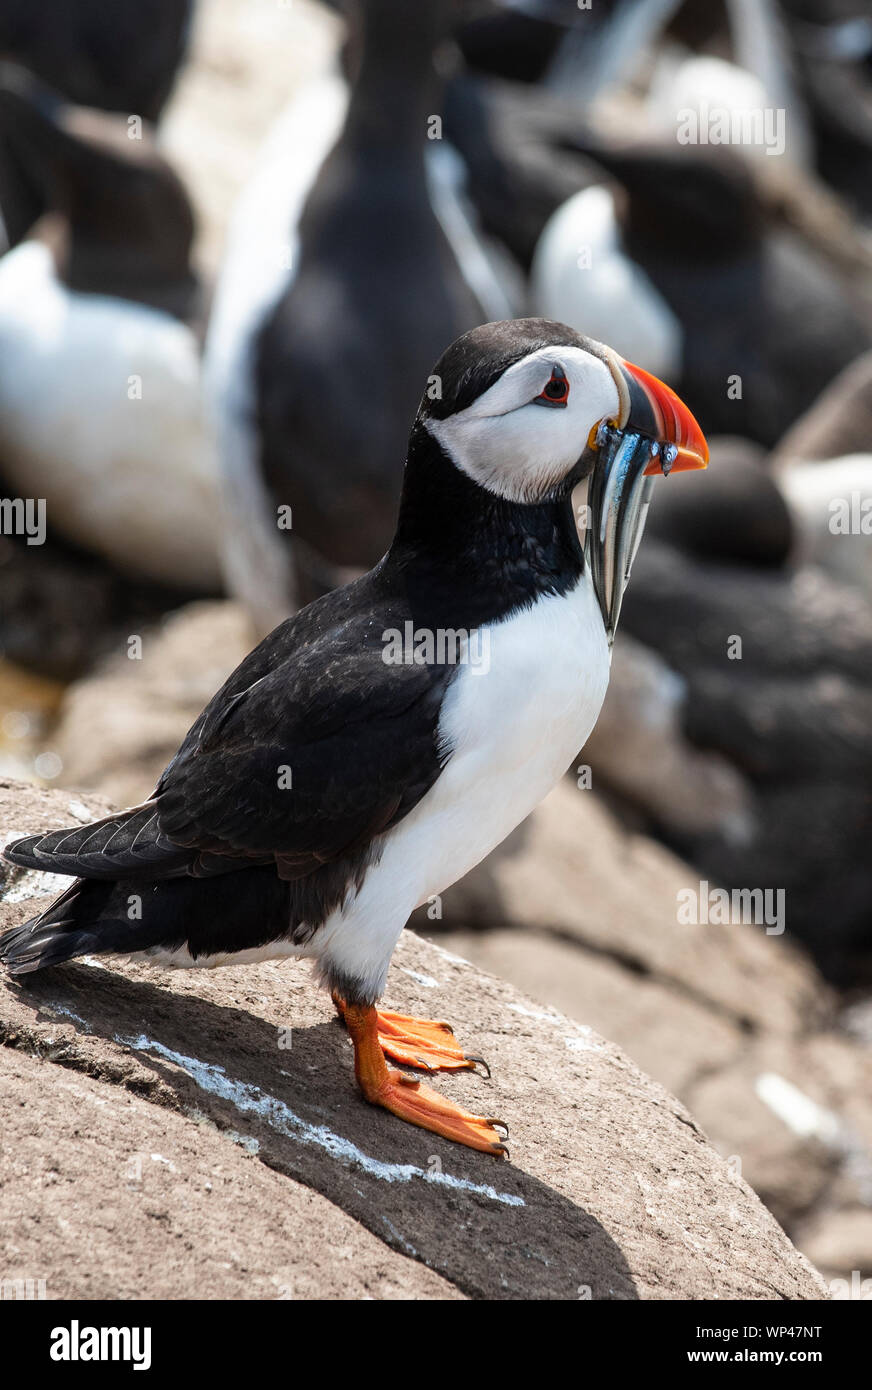 Adult puffin, Fratercula arctica, standing on a rocky coastline with a beakfull of fat sand eels for their chiicks in the nearby nesting burrows, farn Stock Photo